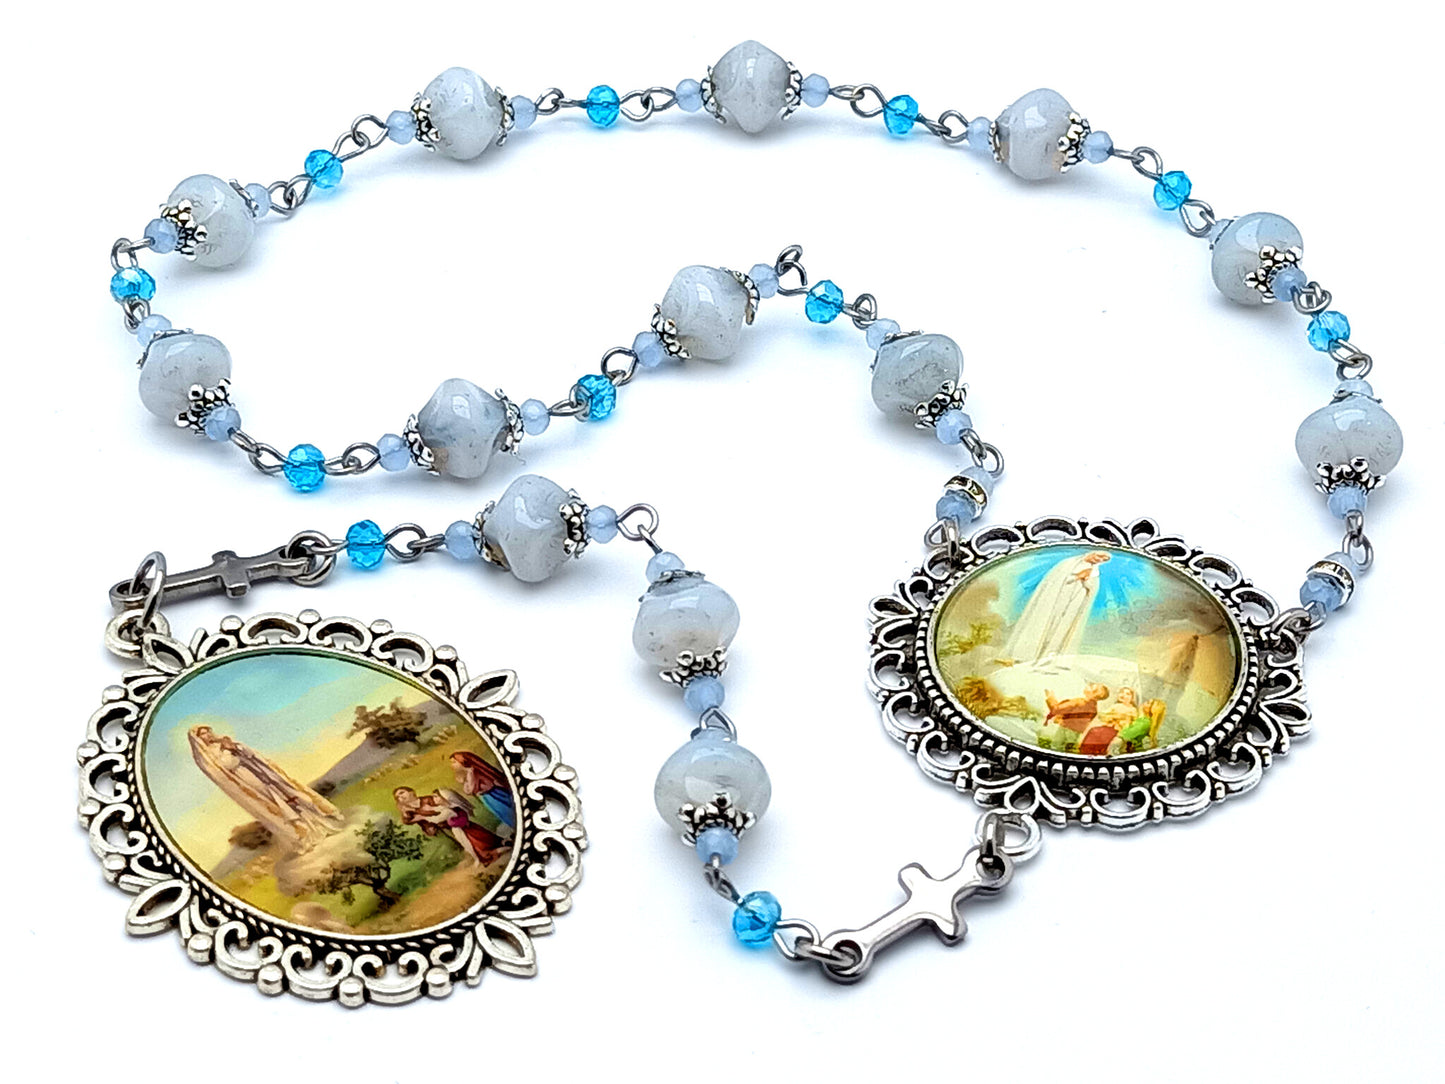 Our Lady of Fatima unique rosary beads glass single decade rosary with domed center medal and children of Fatima picture medal.